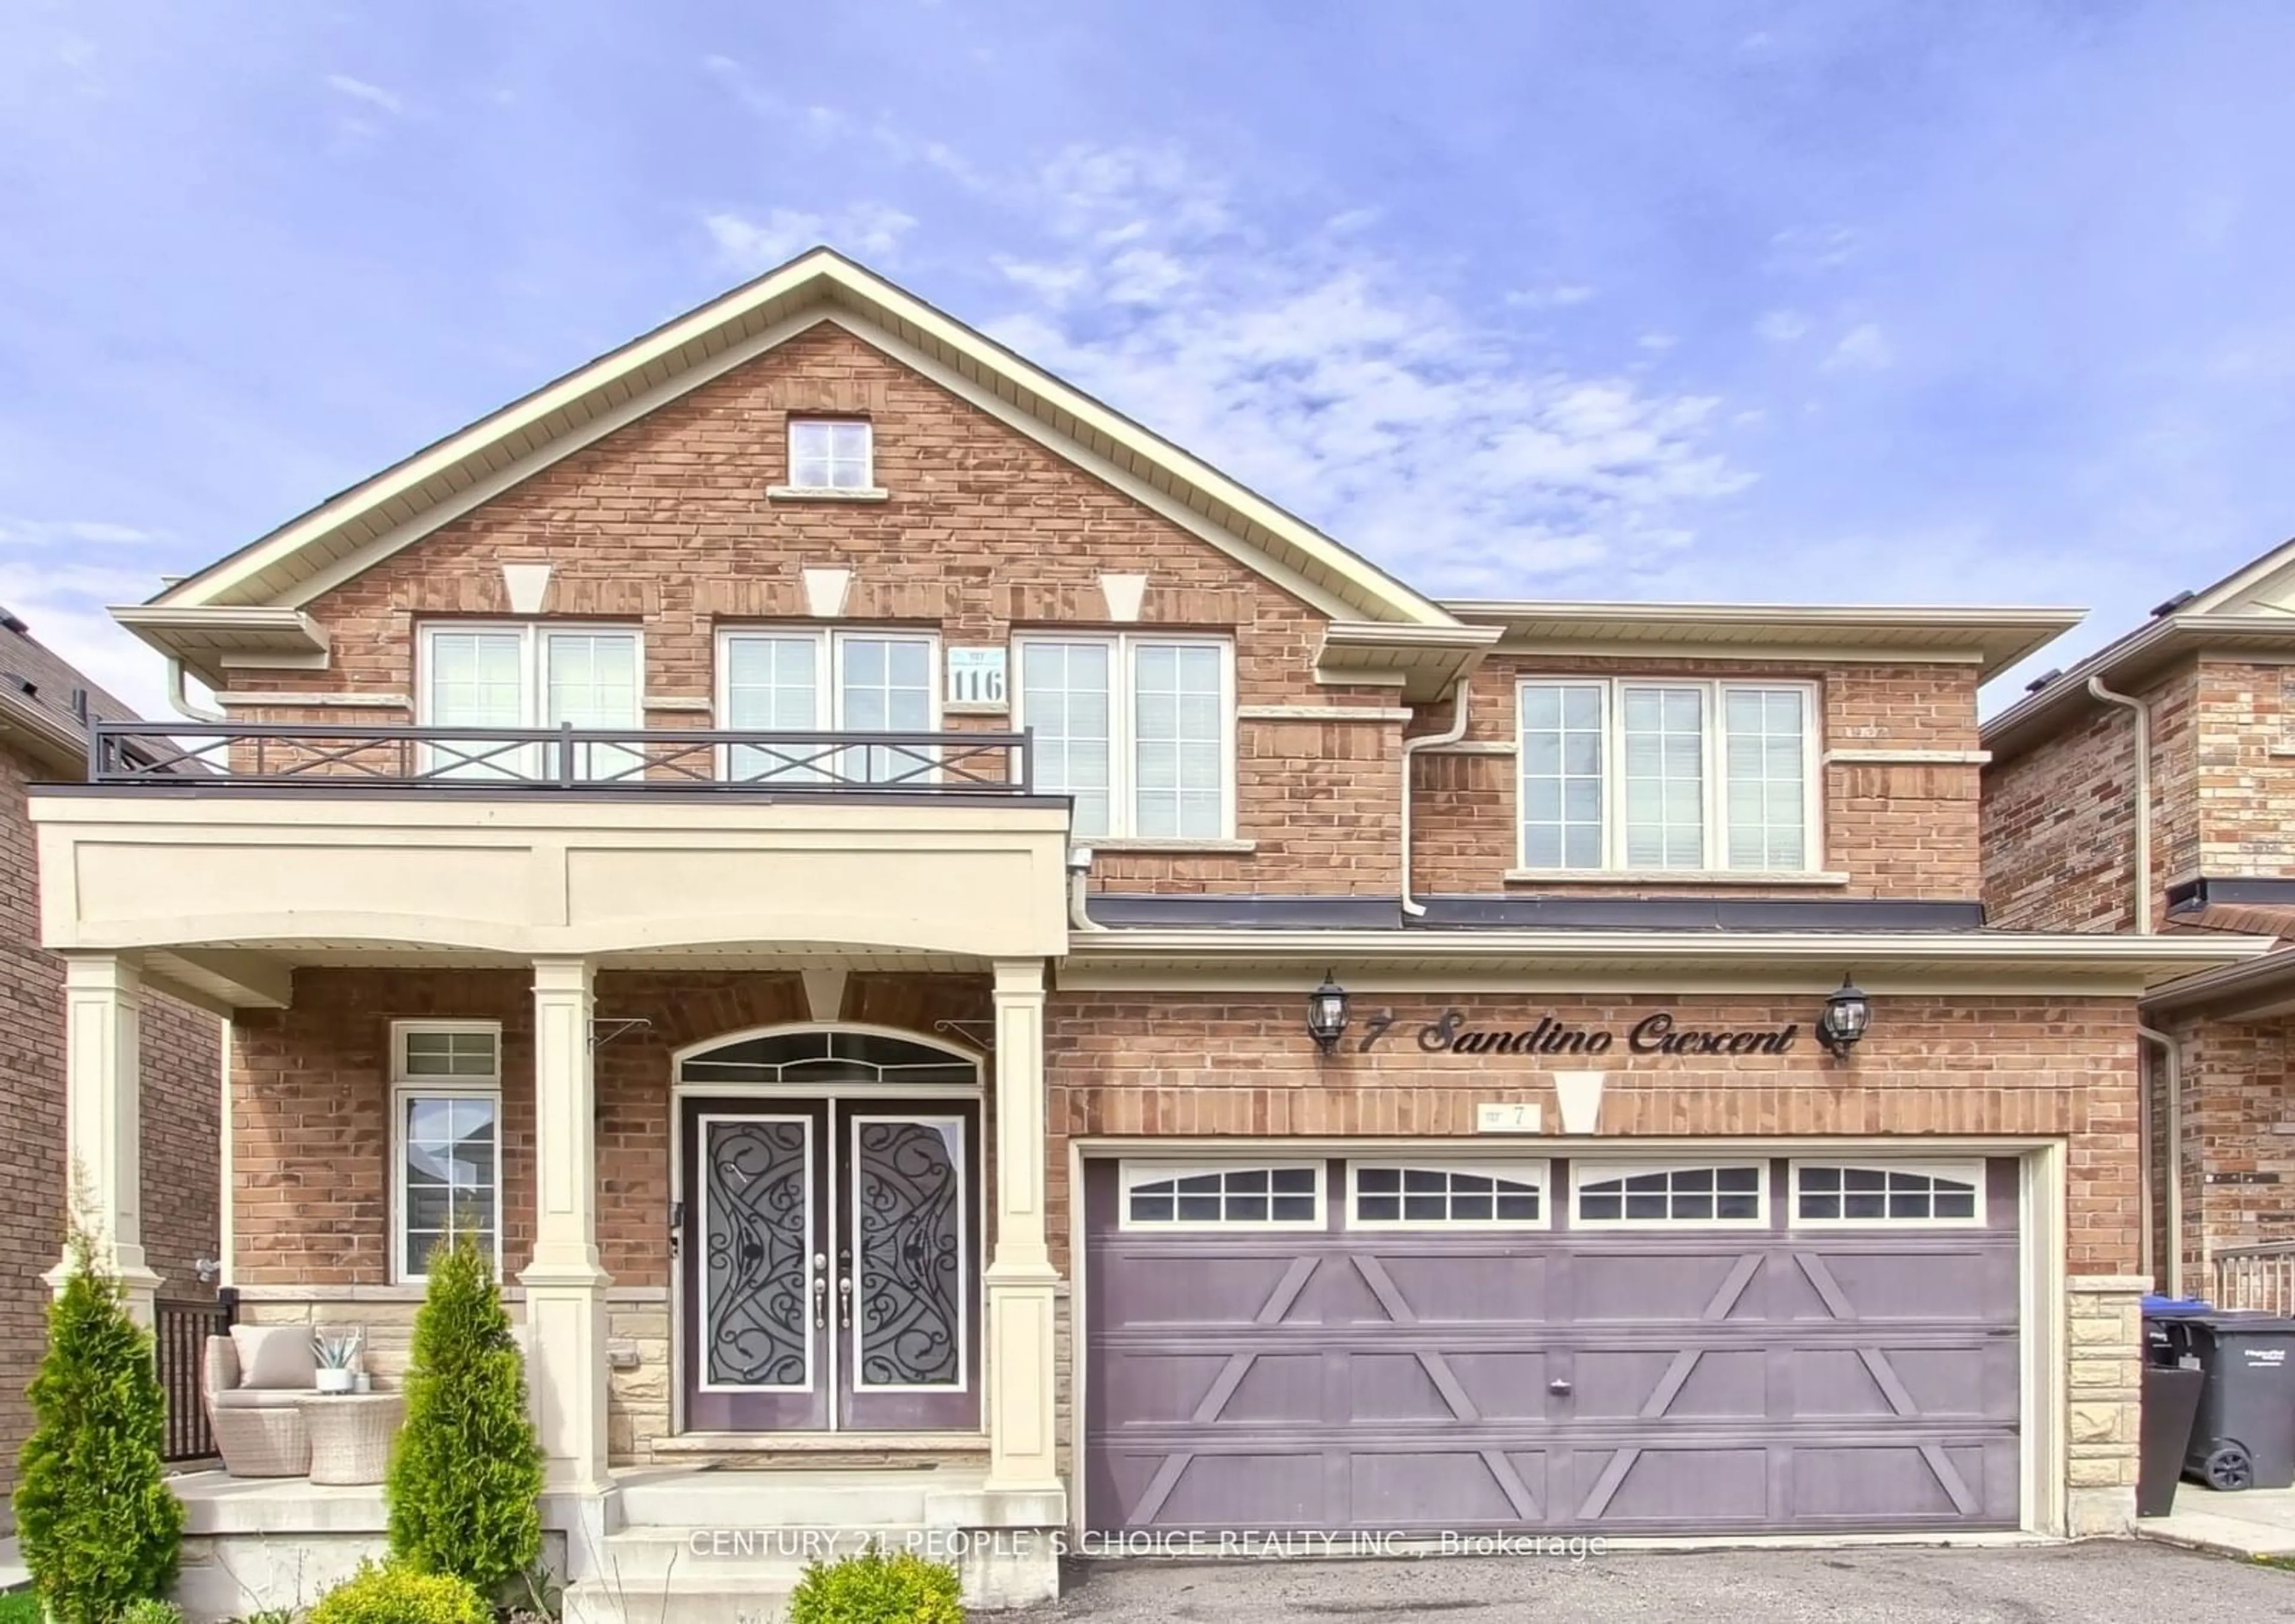 Home with brick exterior material for 7 Sandino Cres, Brampton Ontario L6Y 0G8